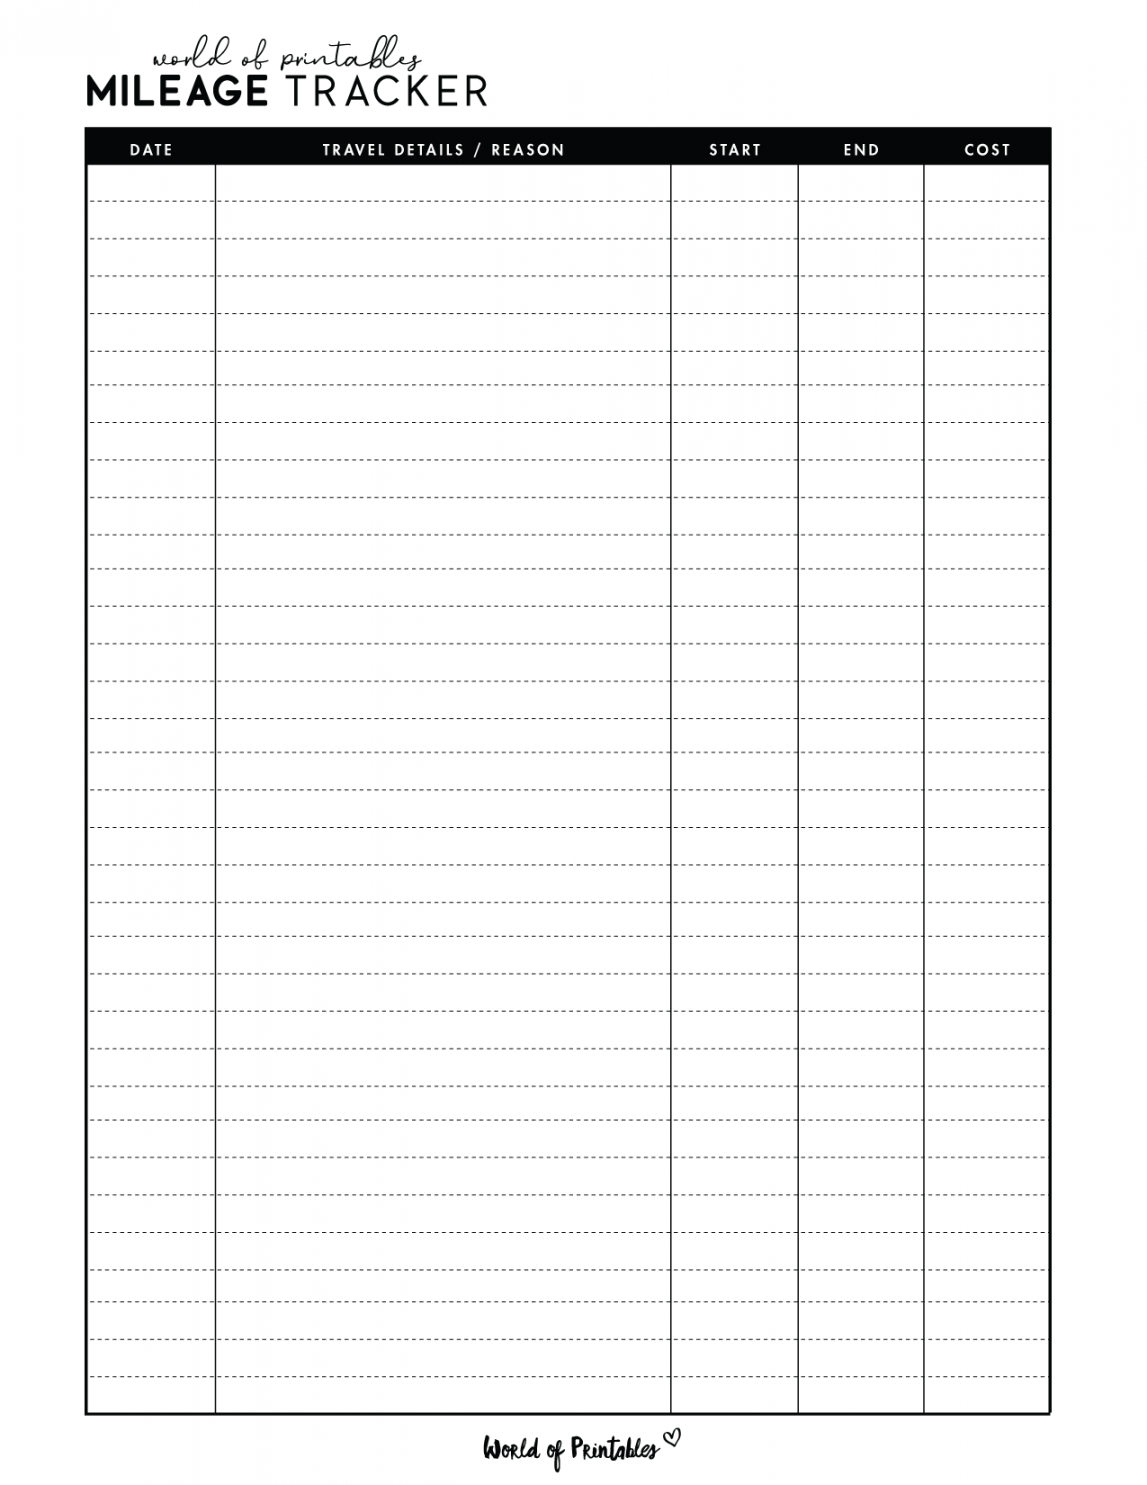 Mileage Log Templates -  Best Styles - World of Printables - FREE Printables - Pdf Free Printable Mileage Log Form